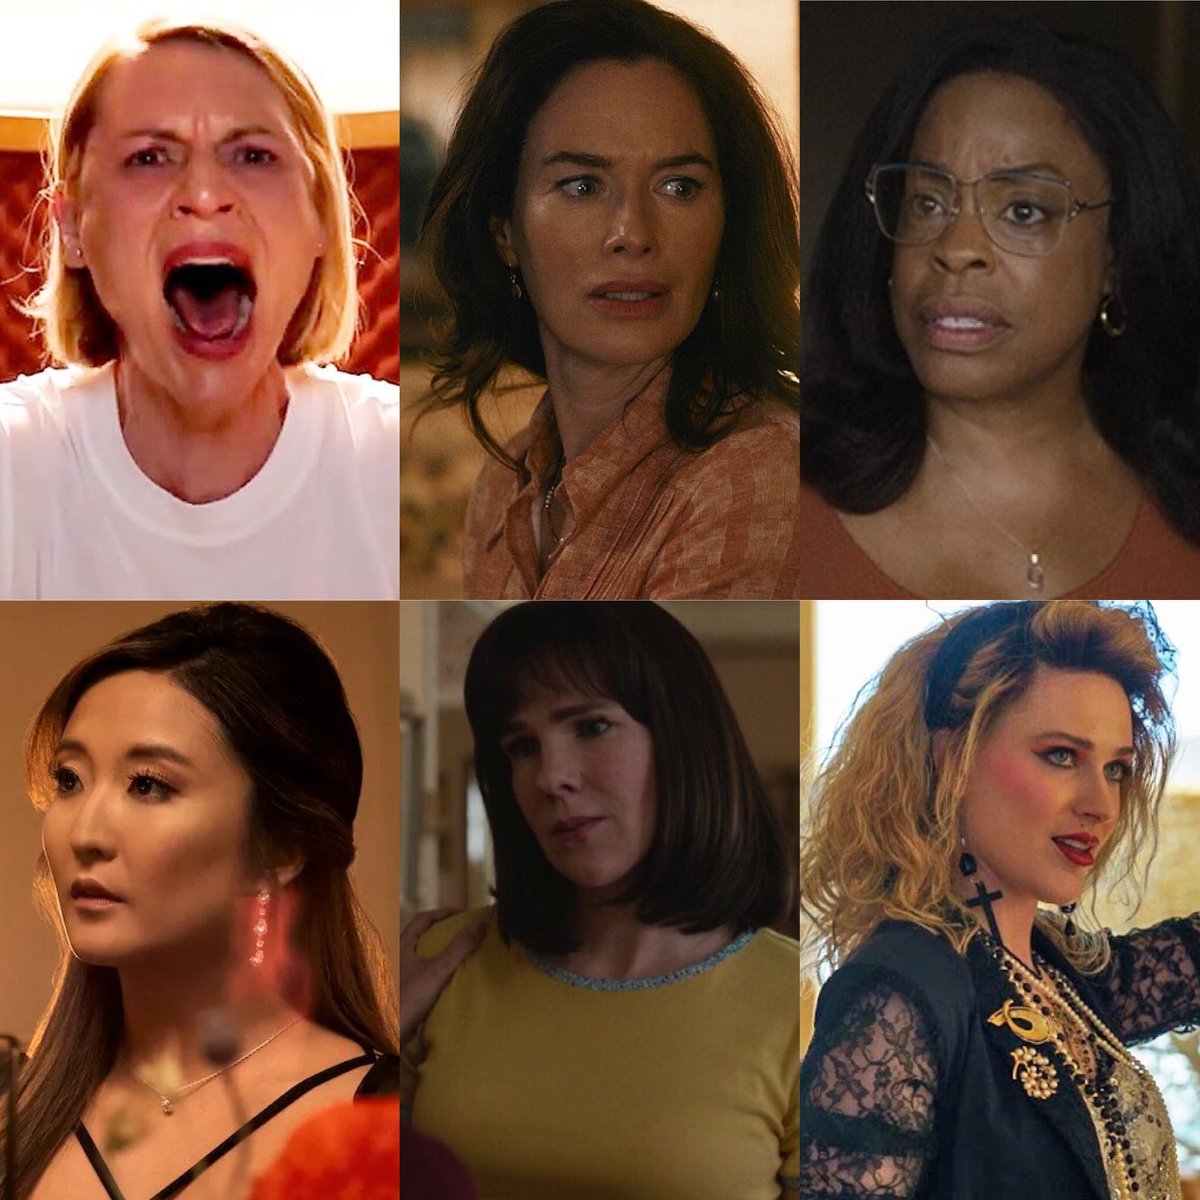 #NicksEmmys: Supporting Actress in a Limited or Anthology Series of Movie  
#ClaireDanes: #FleishmanIsInTrouble 
#LenaHeadey: #WhiteHousePlumbers 
#NiecyNashBetts: #Dahmer – #Monster 🏆
#AshleyPark: #Beef 
#LilyRabe: #LoveDeath 
#EvanRachelWood: #Weird: The Al Yankovic Story